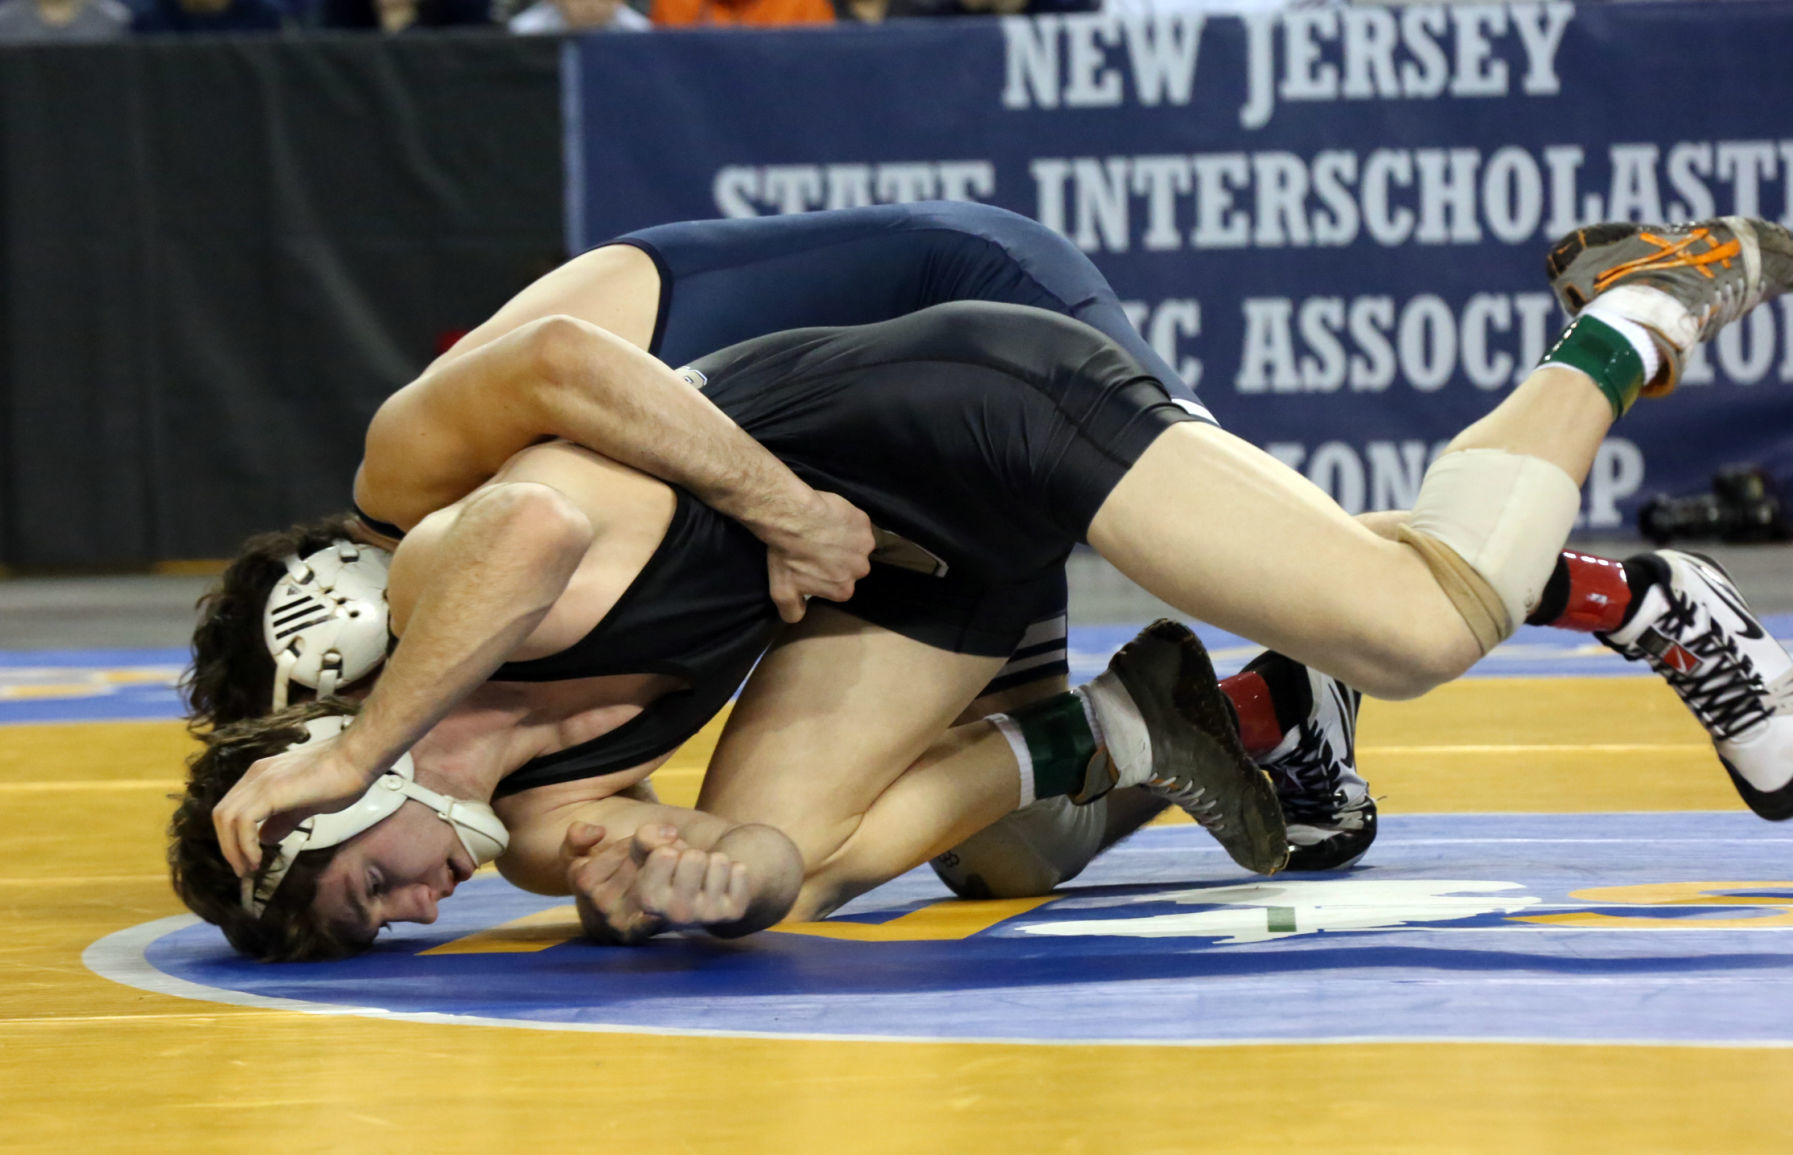 Referee in Buena wrestler haircut incident suspended for two years